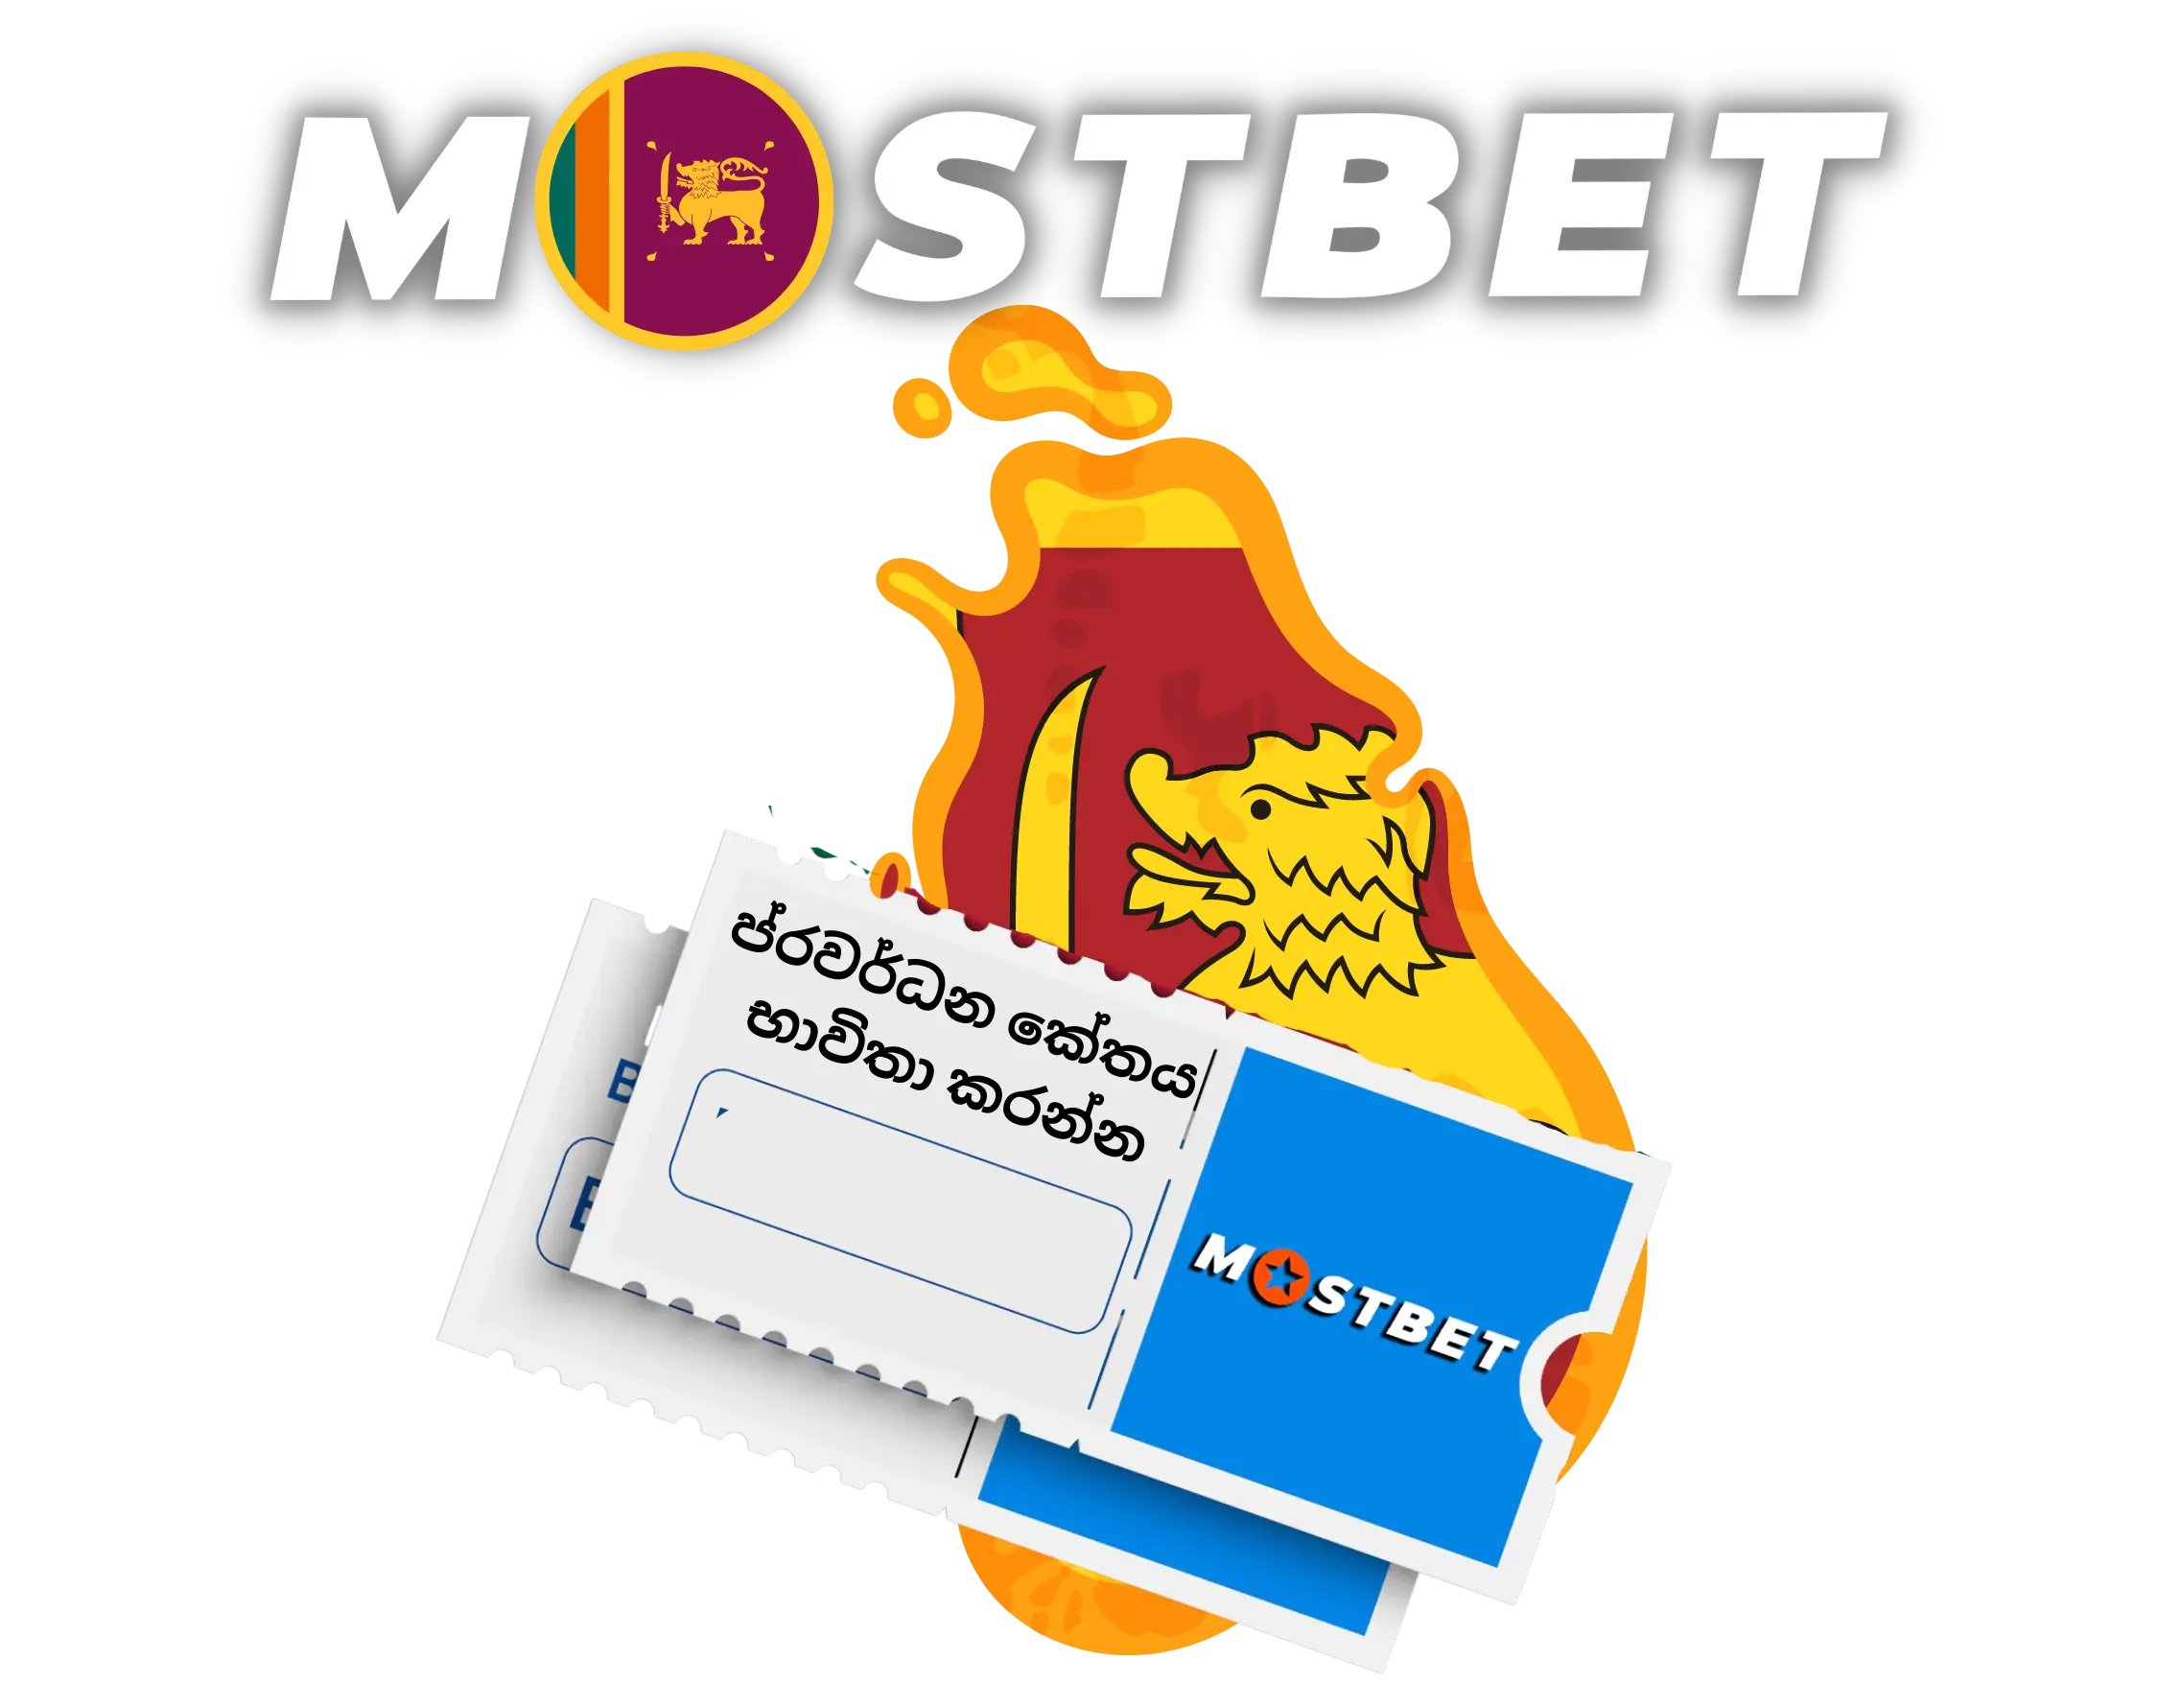 I Don't Want To Spend This Much Time On Mostbet Site Oficial em Portugal | Login & Registro » Obter bônus. How About You?